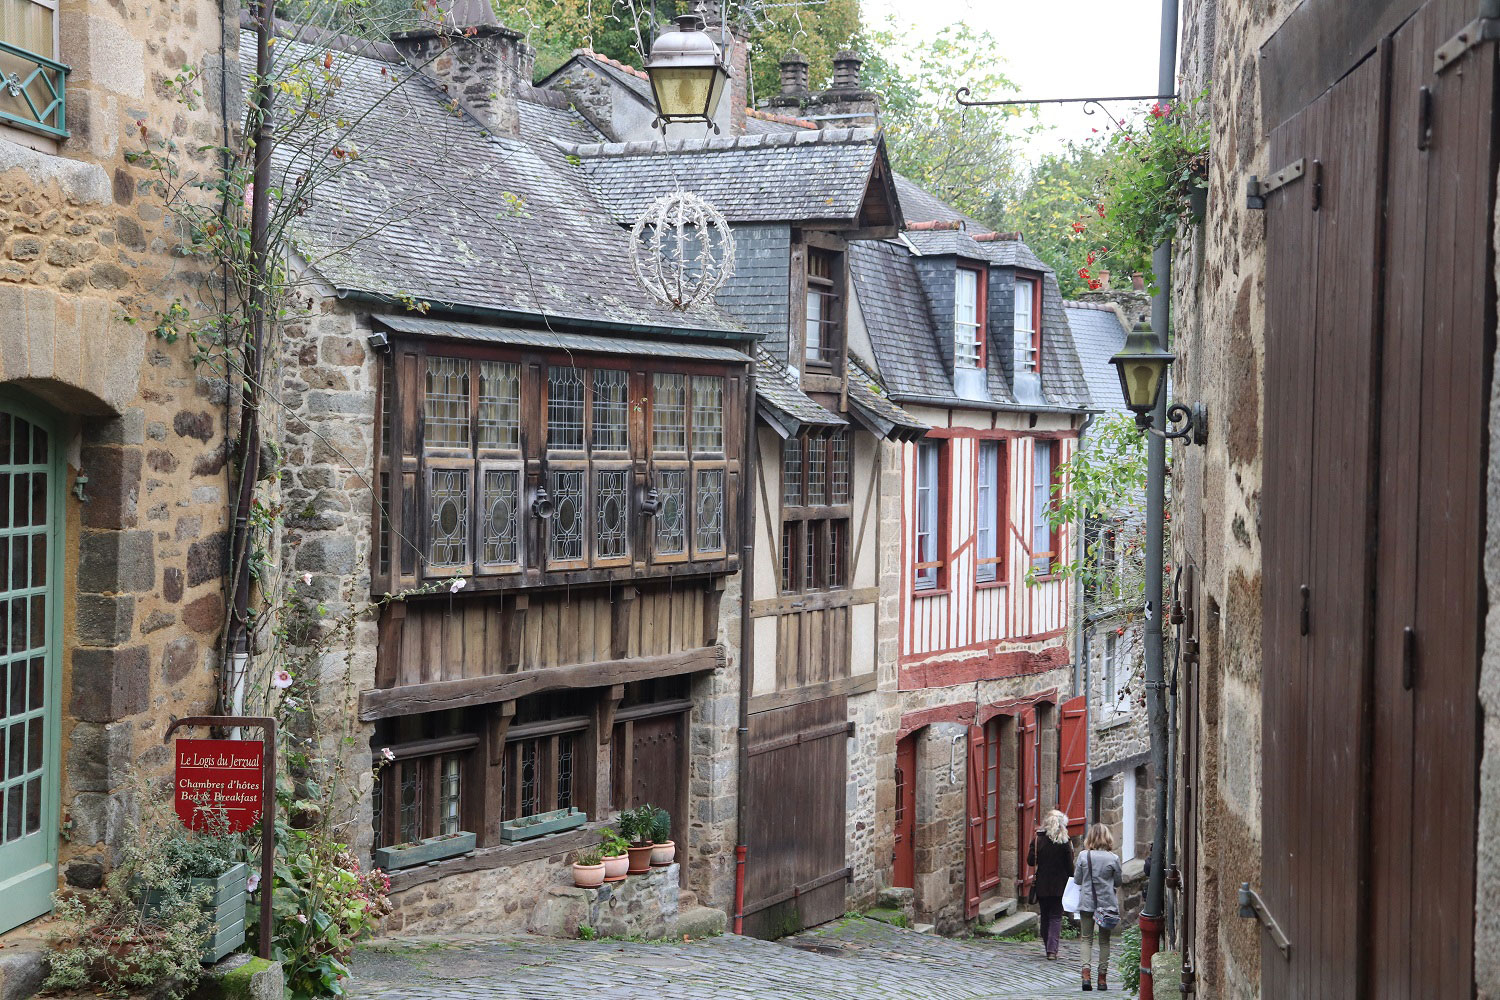 The streets of Dinan